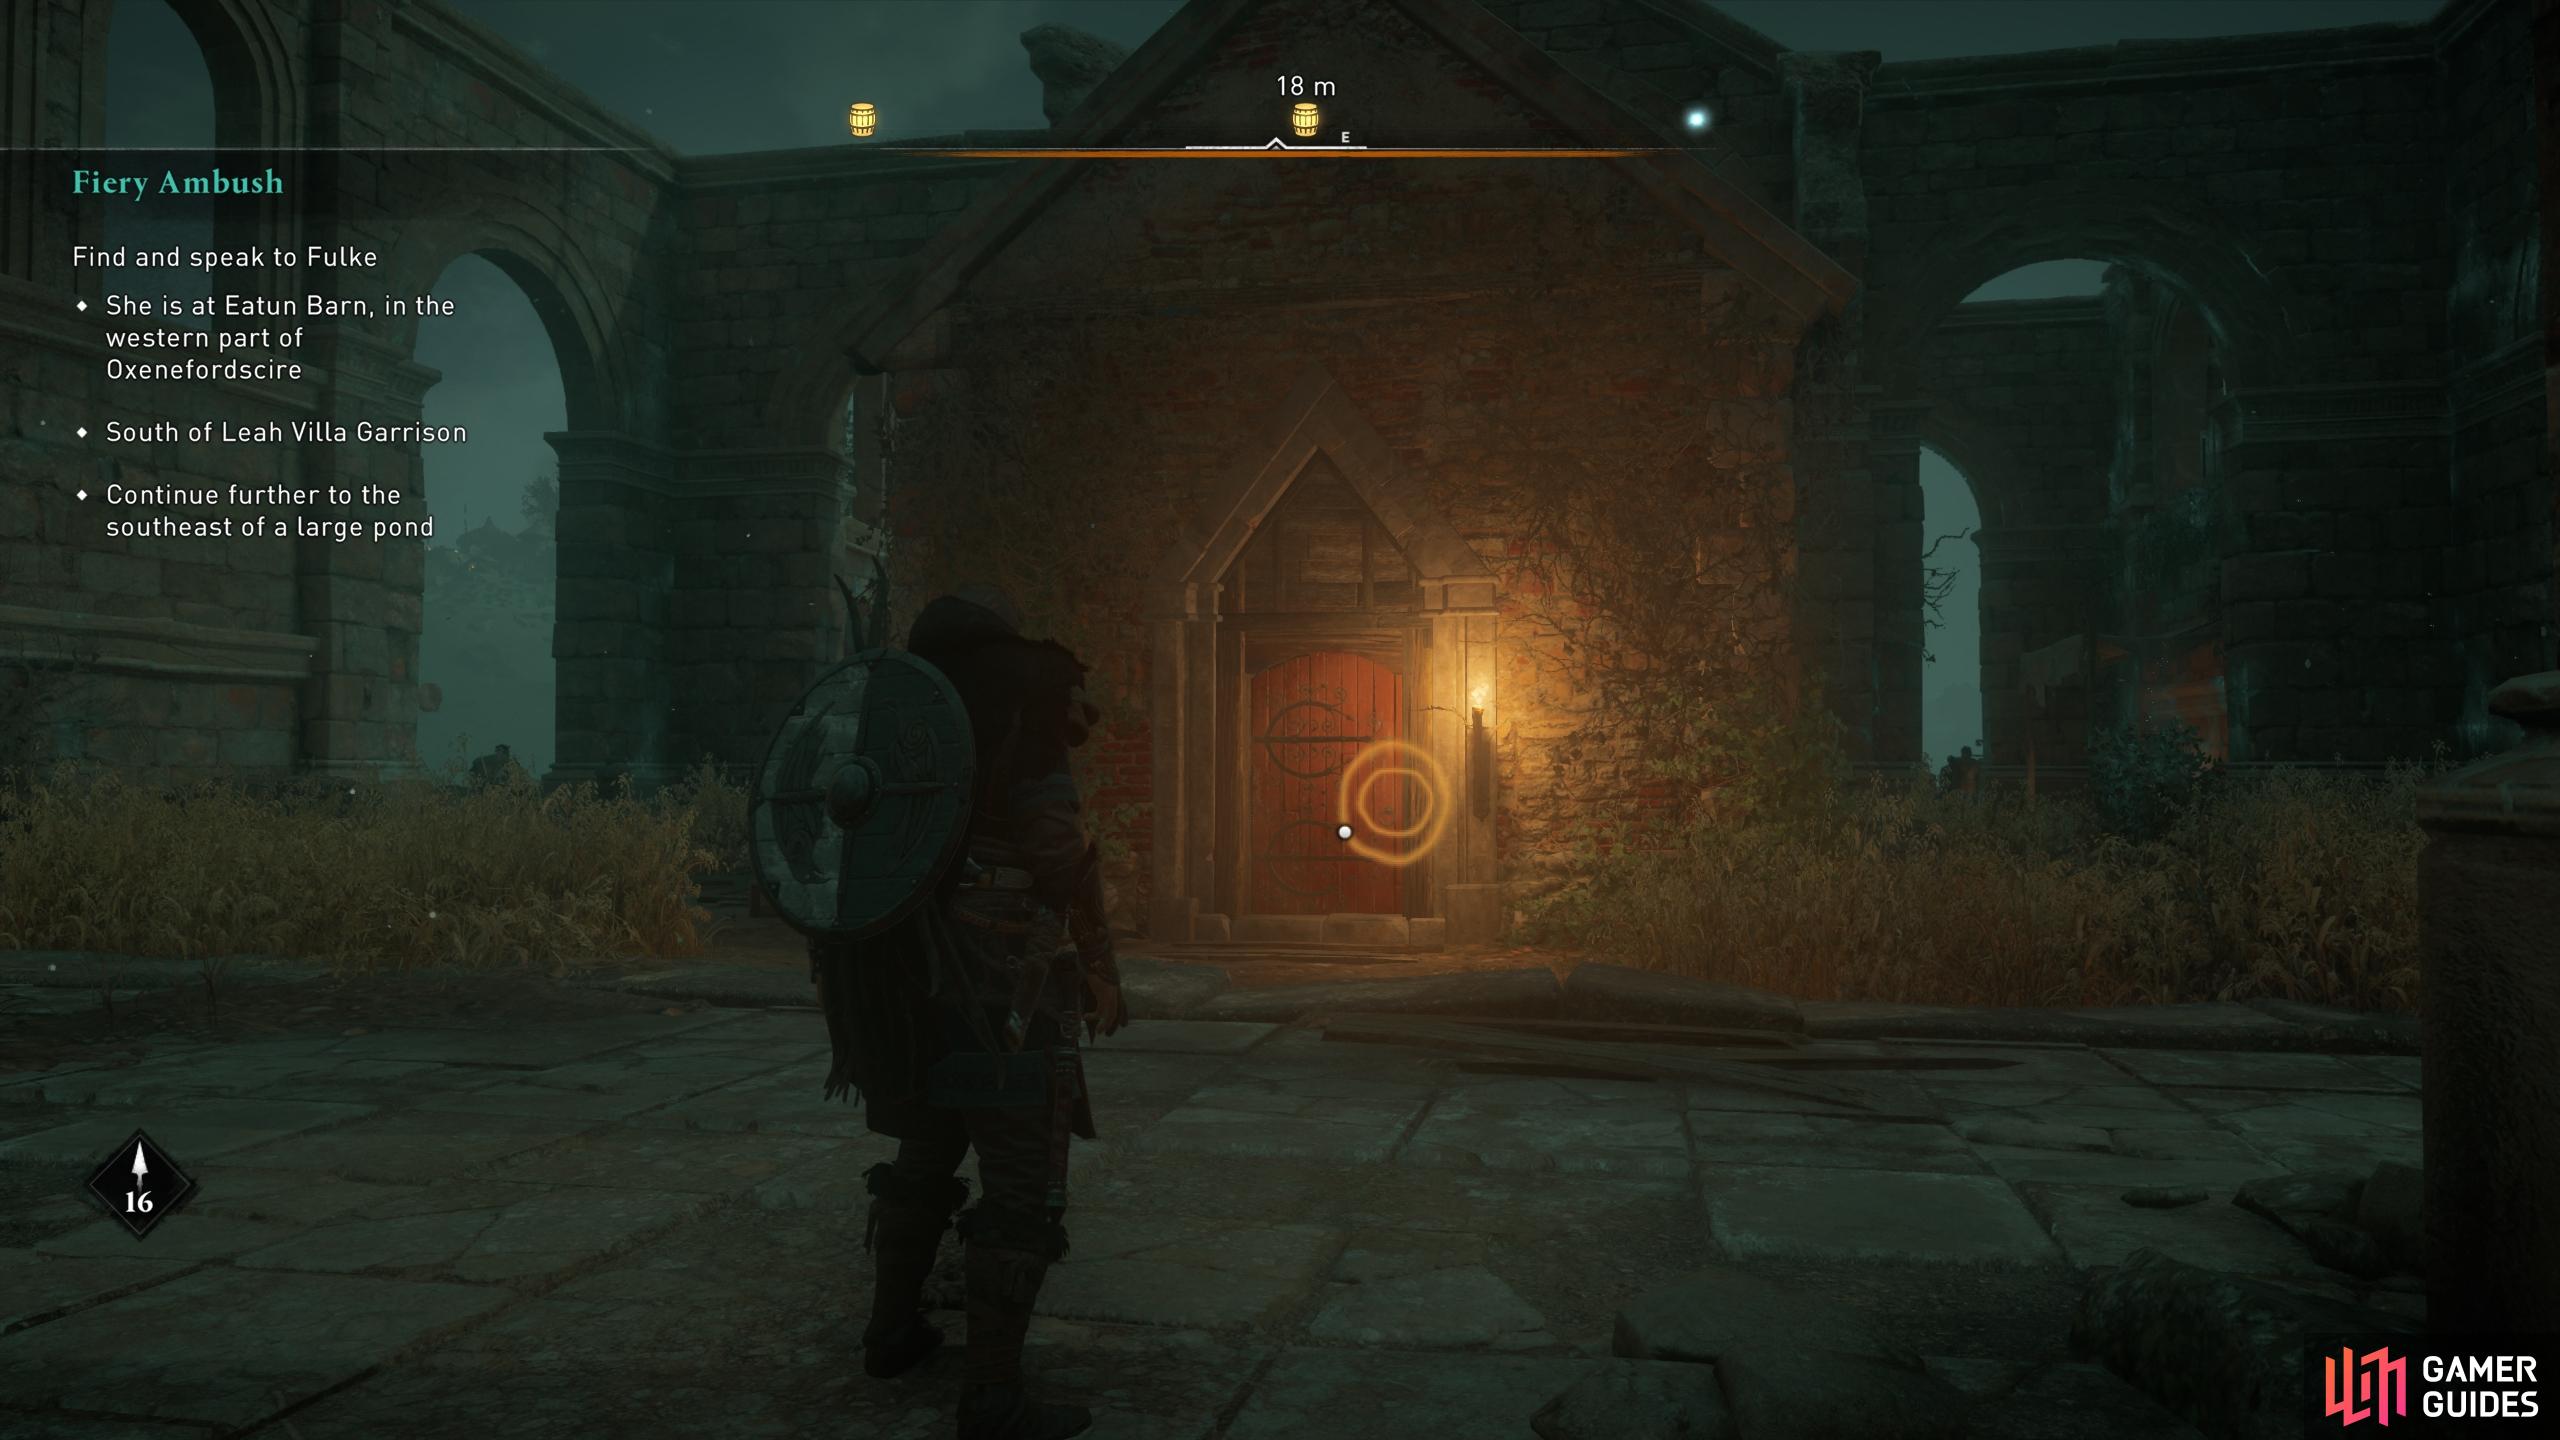 You'll find the third chest of materials in a small chapel northeast of the Abbey entrance.